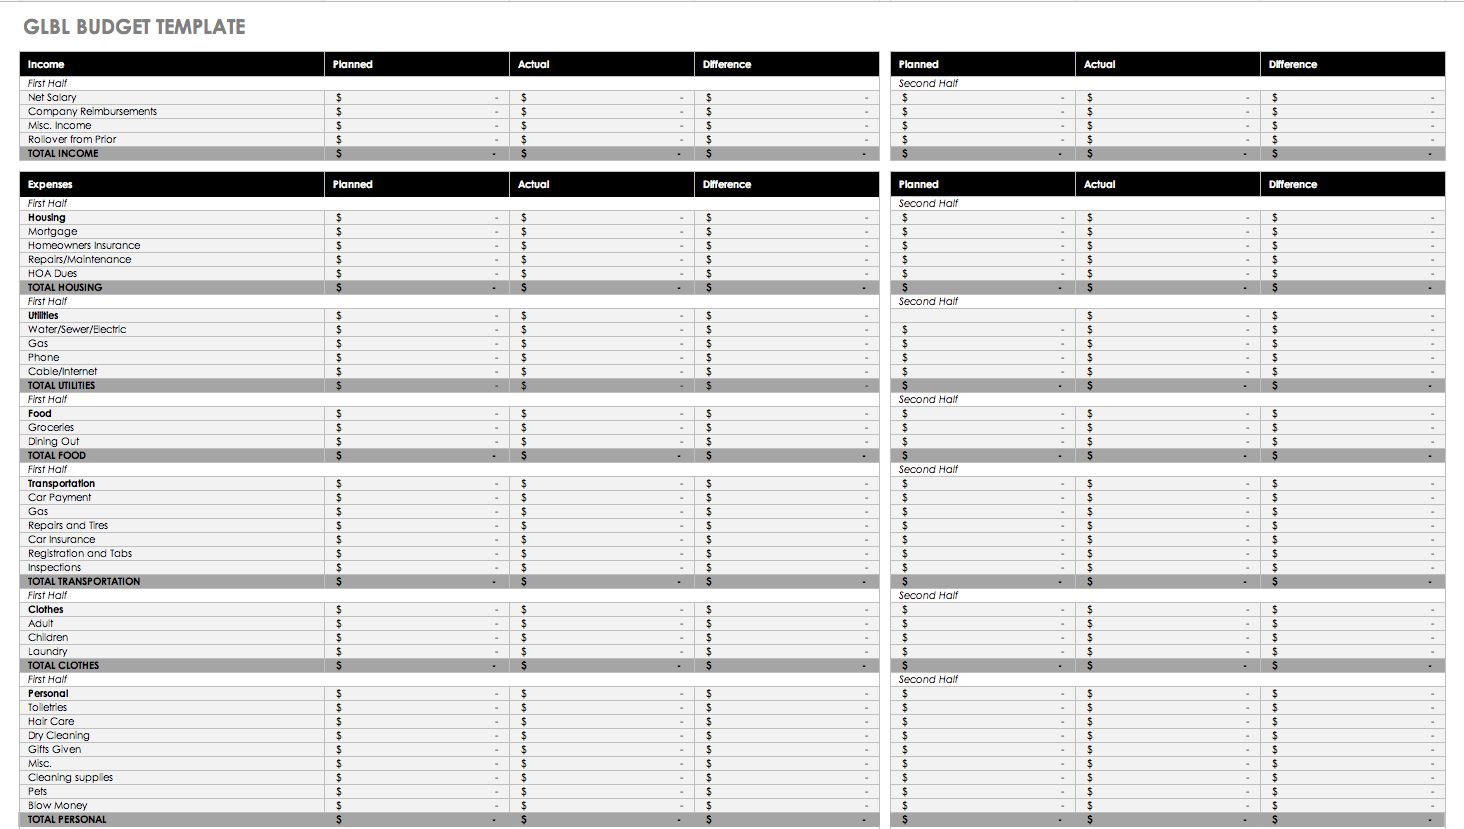 Weekly Paycheck Budget Spreadsheet Inside Free Budget Templates In Excel For Any Use